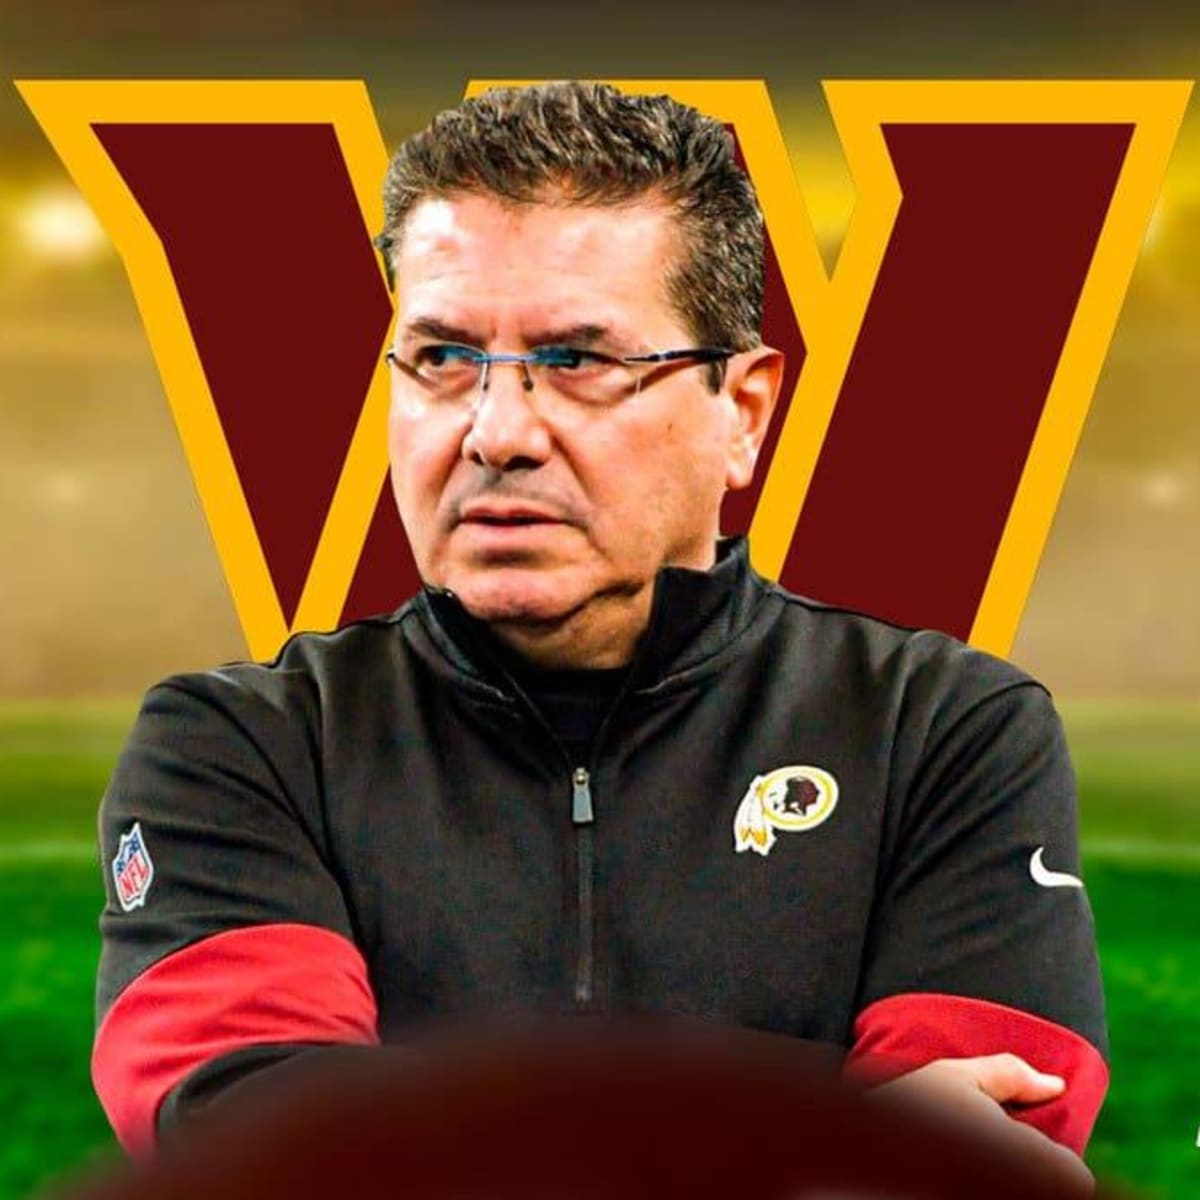 Washington Commanders' Legal Issues Resolved, Dan Snyder Sale to